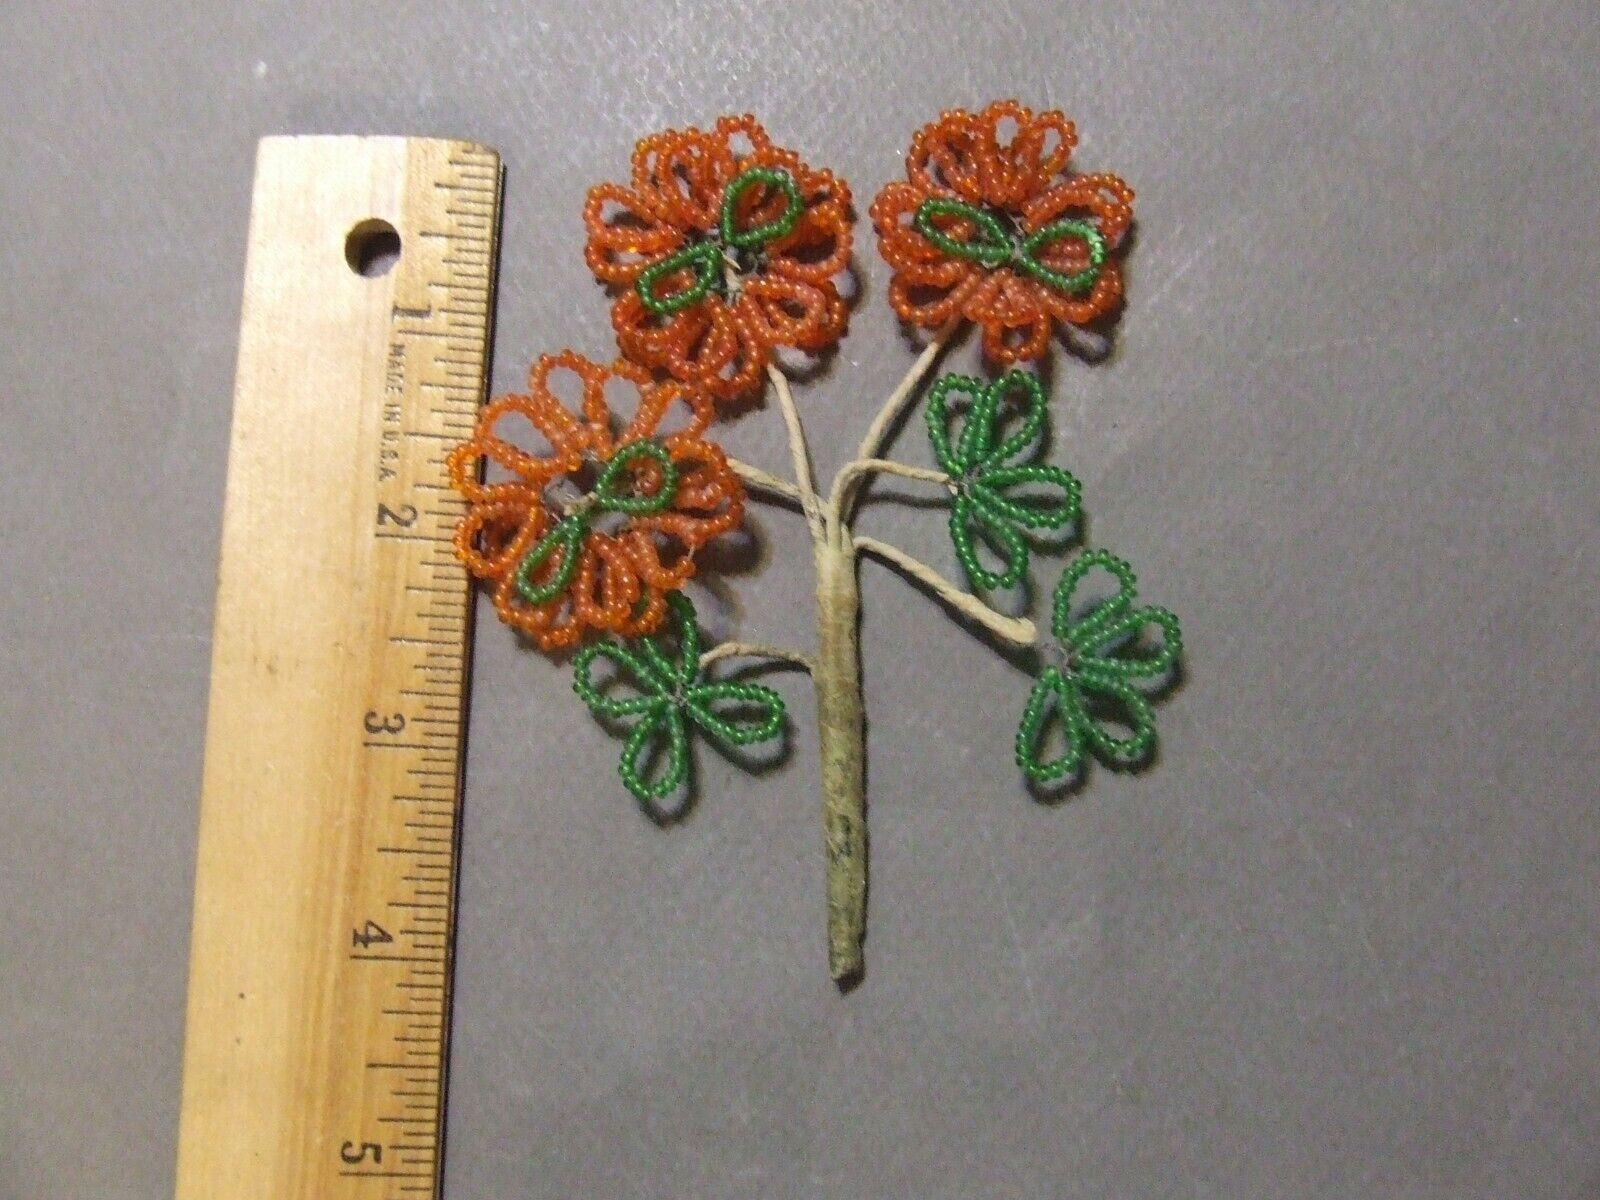 ANTIQUE VINTAGE FRENCH GLASS SEED BEAD FLOWER PICK ORANGE AND GREEN FLOWERS 